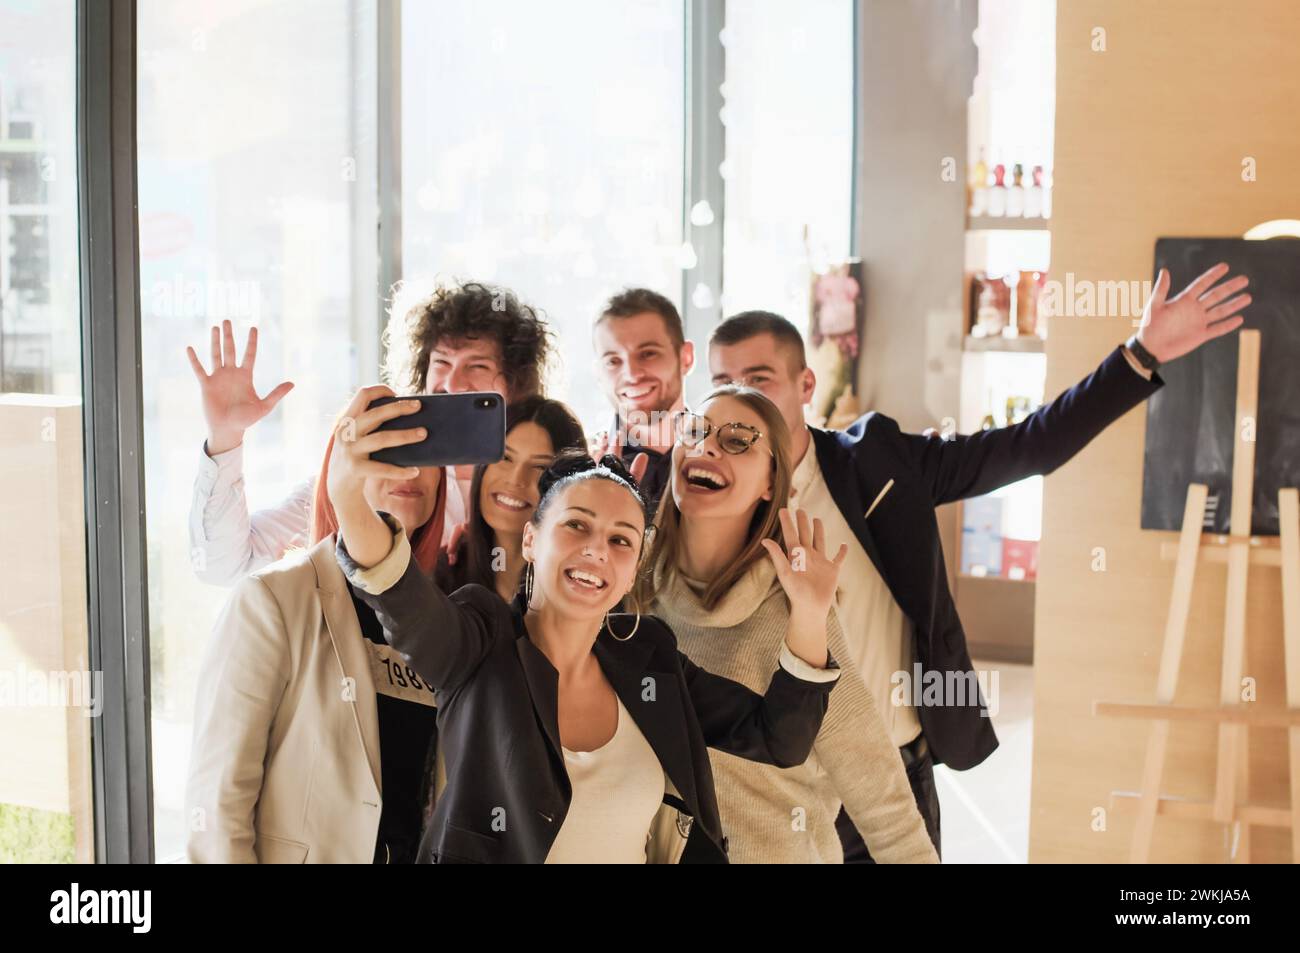 A group of young business colleagues posing together and taking a self-portrait with a smartphone. Friends with happy smiling face expressions. Stock Photo